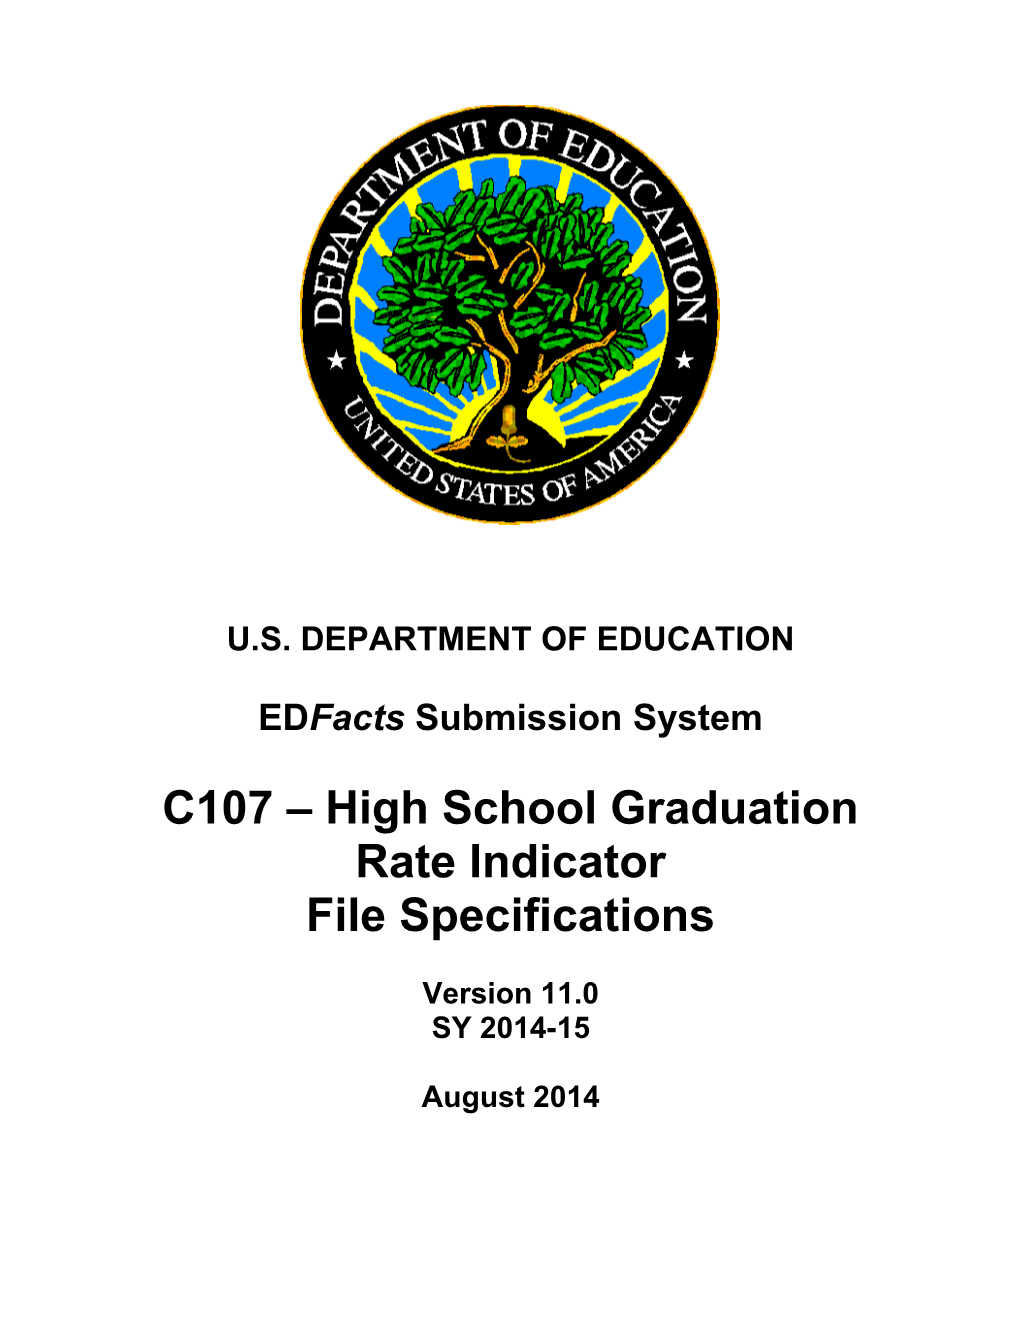 High School Graduation Rate Indicator File Specifications